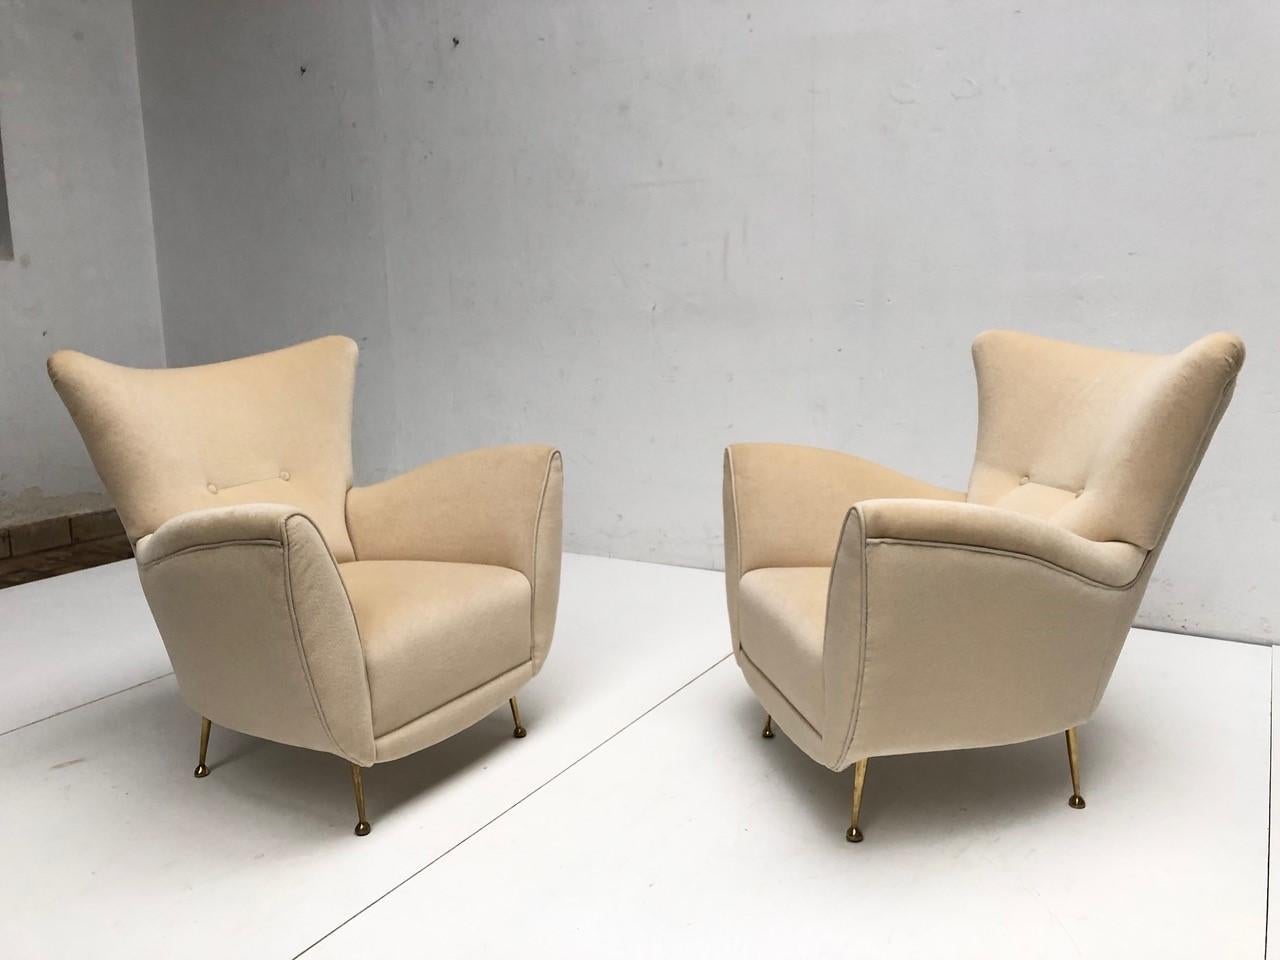 Italian Sculptural Form Lounge Chairs, Mohair Fabric with Brass Legs, ISA, Italy, 1950 For Sale